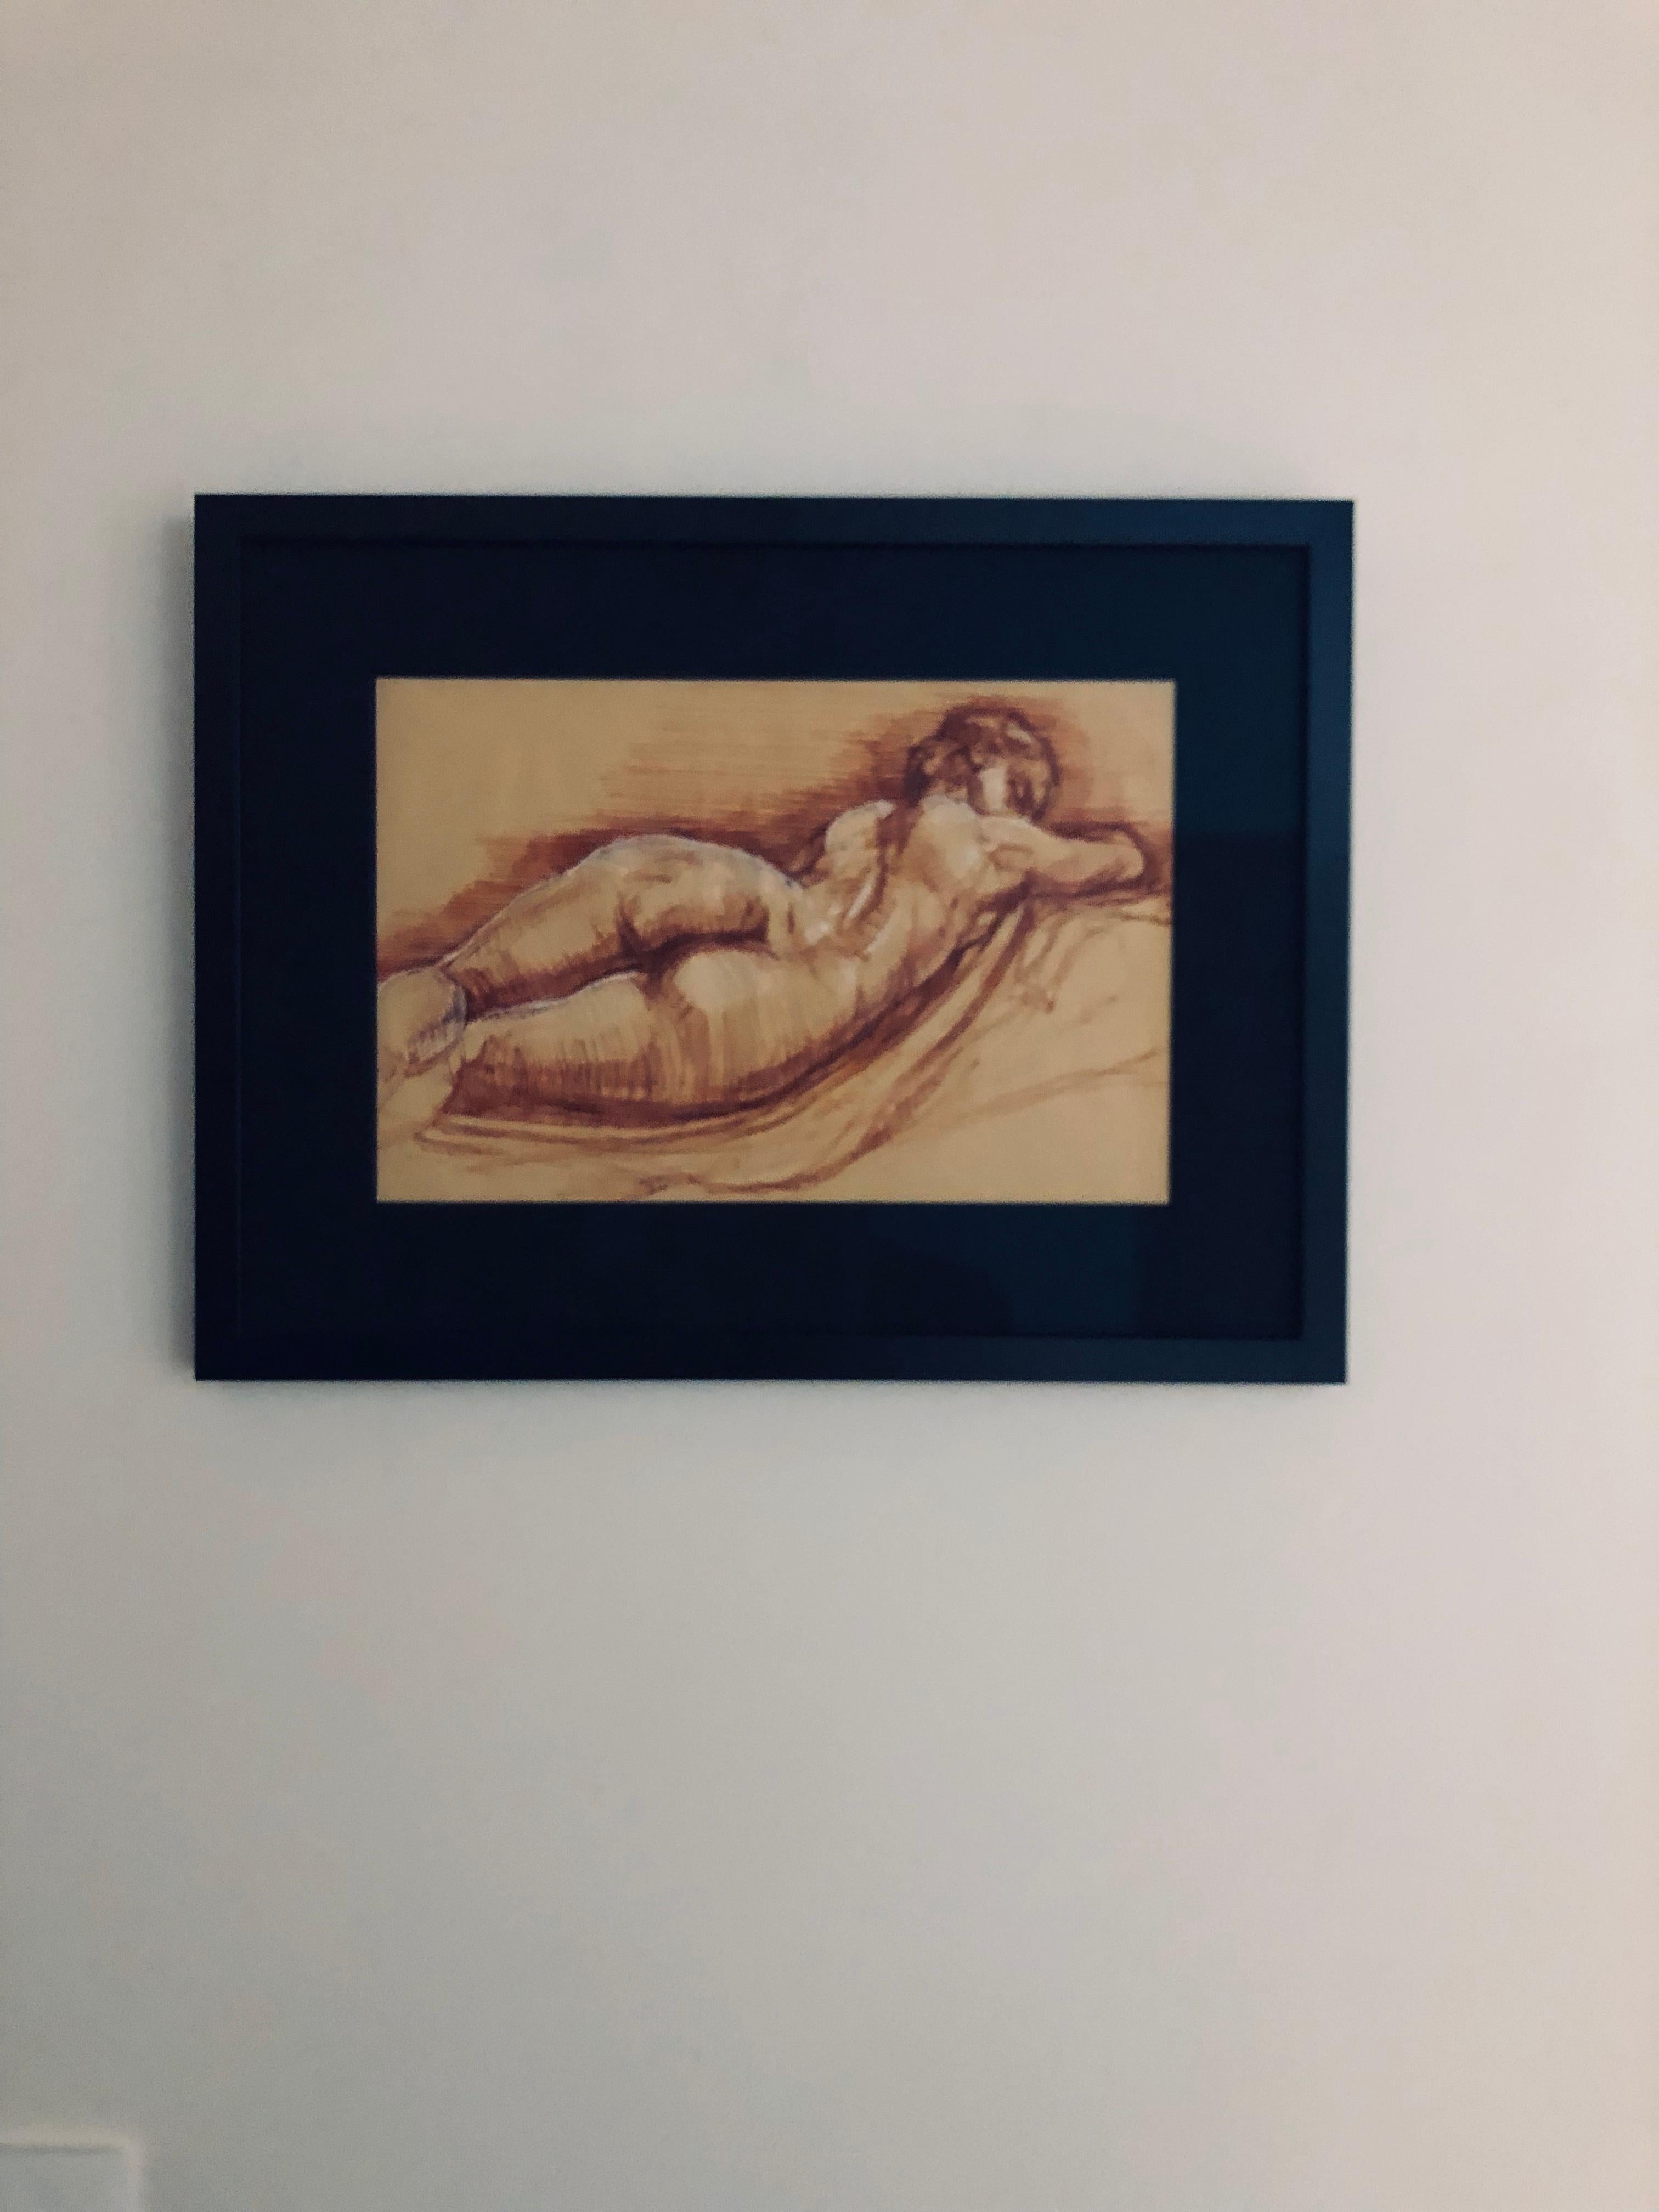 Sleeping Hermaphrodite, Female Nude, Pen Drawing after a Roman Sculpture - Brown Figurative Art by Christopher Ganz